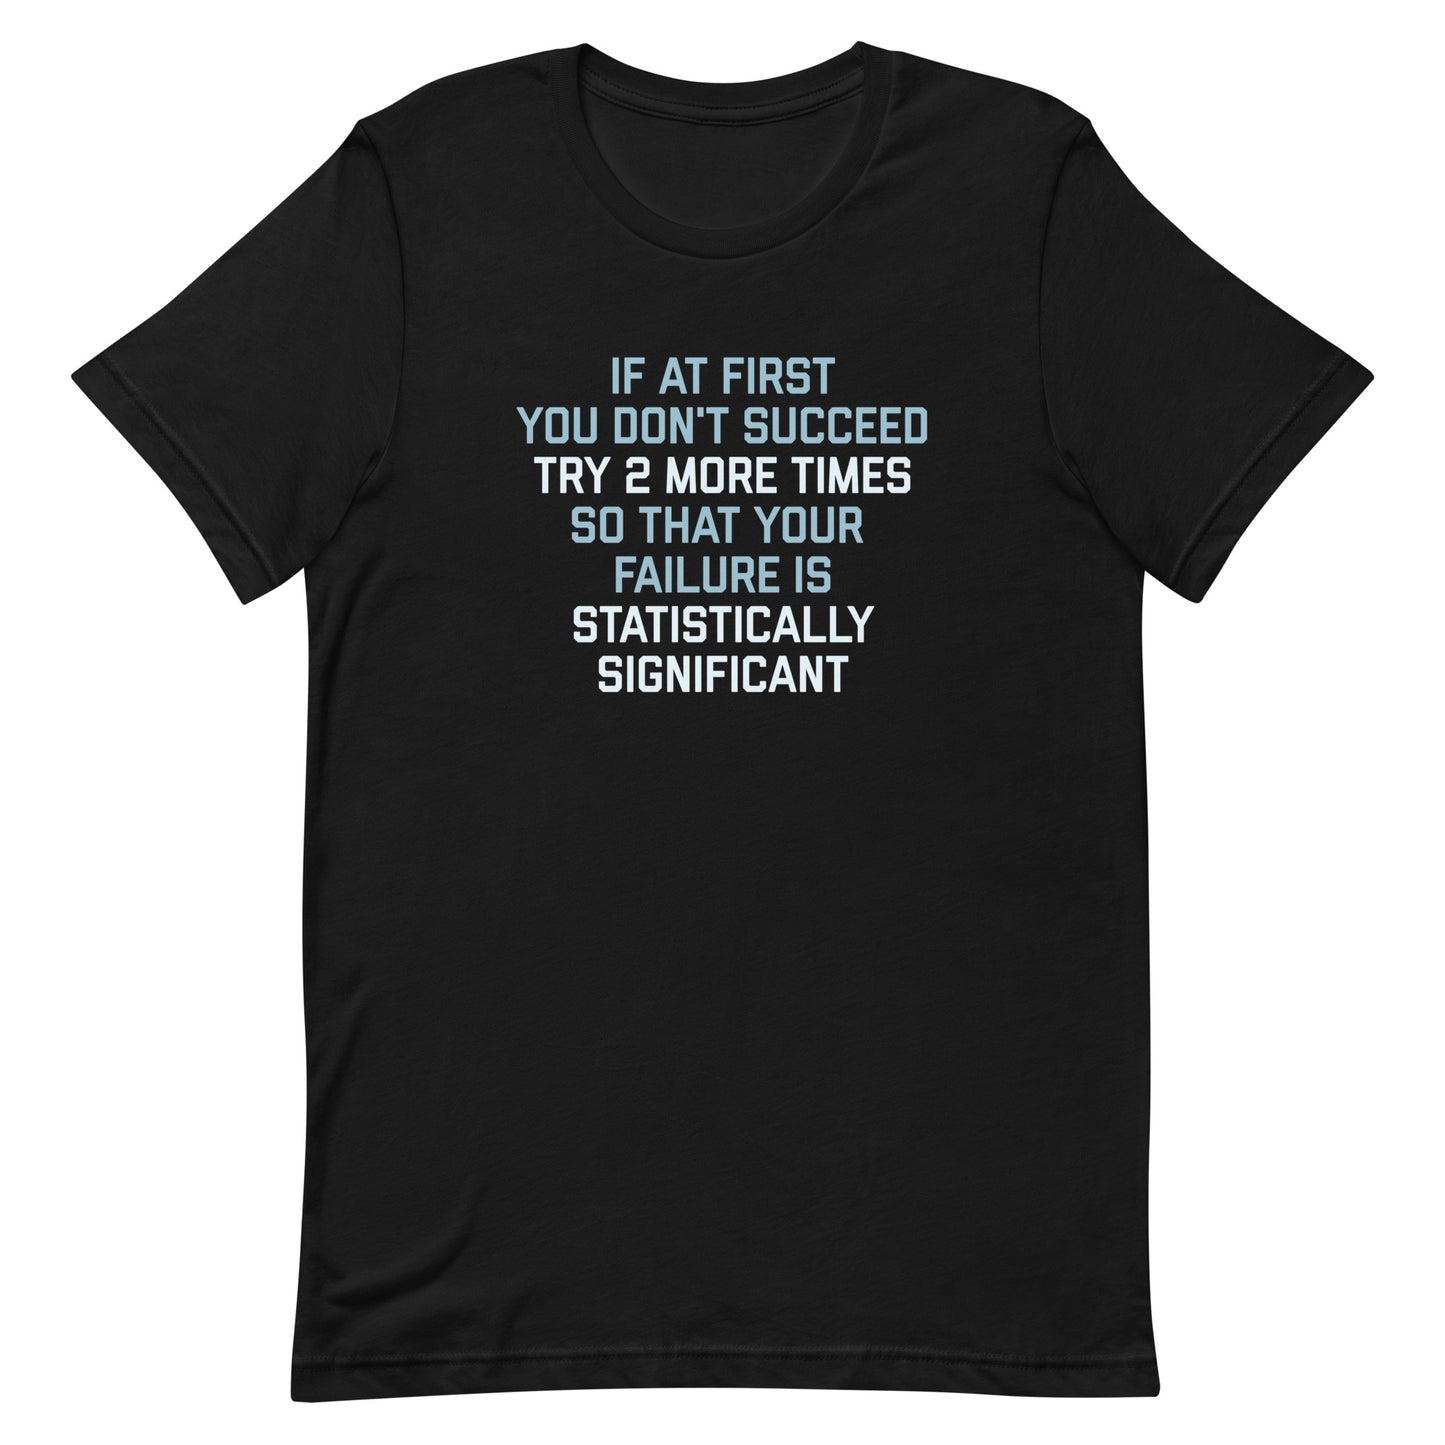 Try 2 More Times So That Your Failure Is Statistically Significant Men's Signature Tee